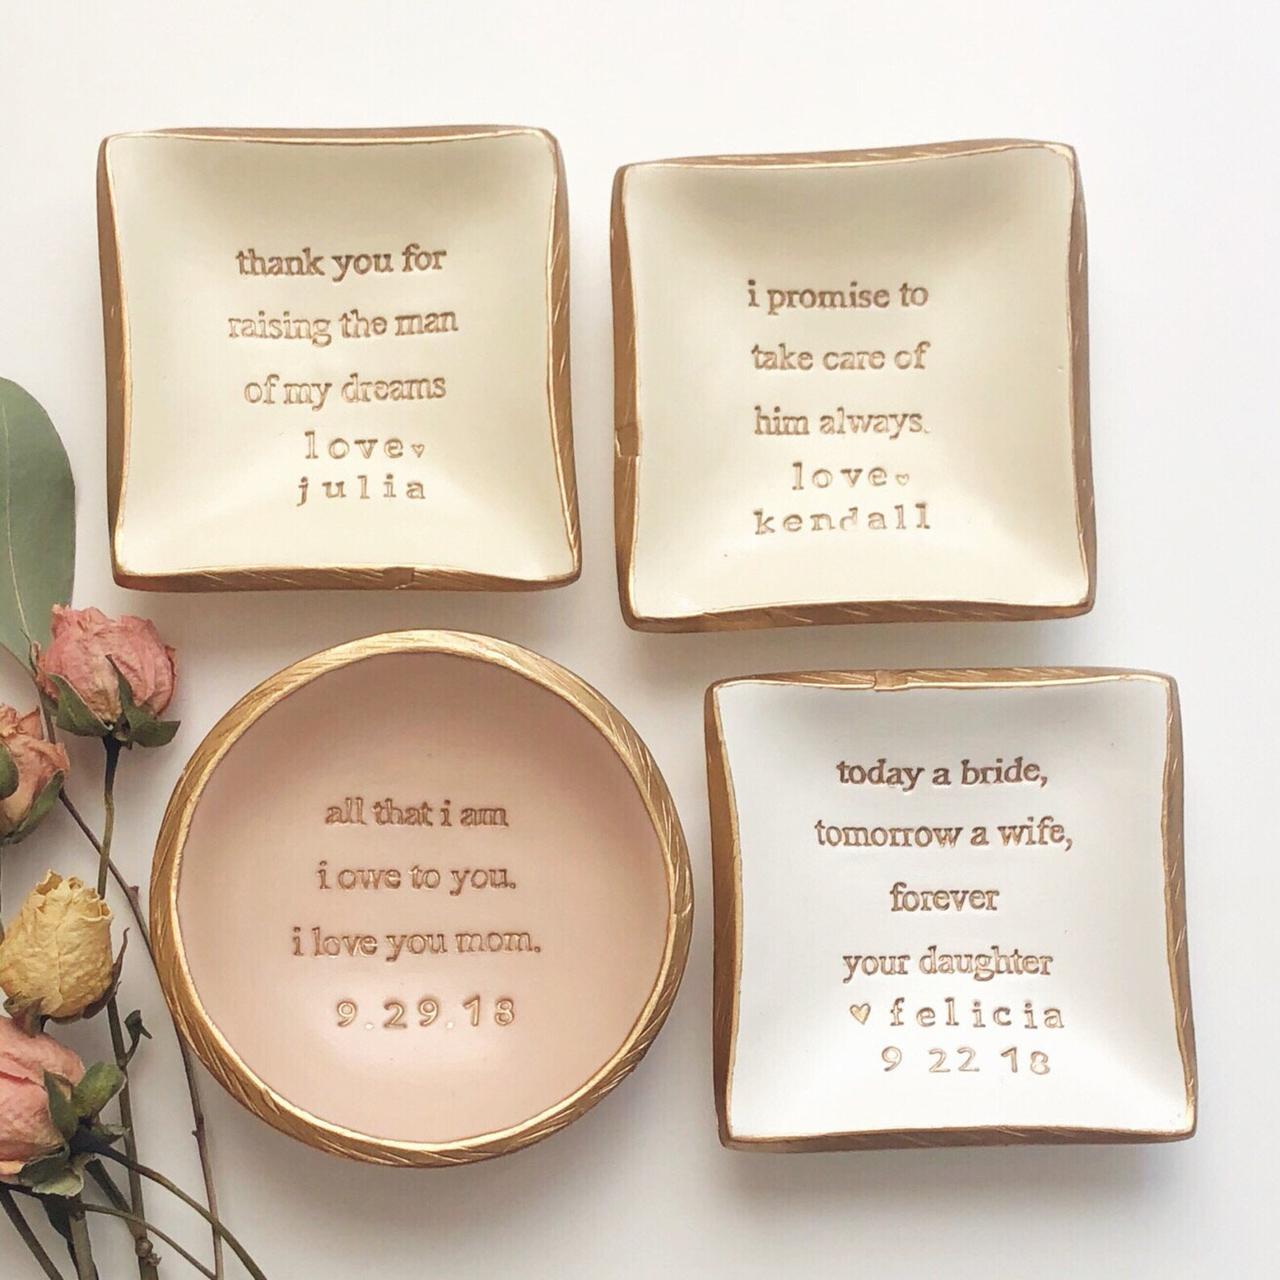 Mother of the Groom Gifts: 34 Sweet Ways to Say Thank You